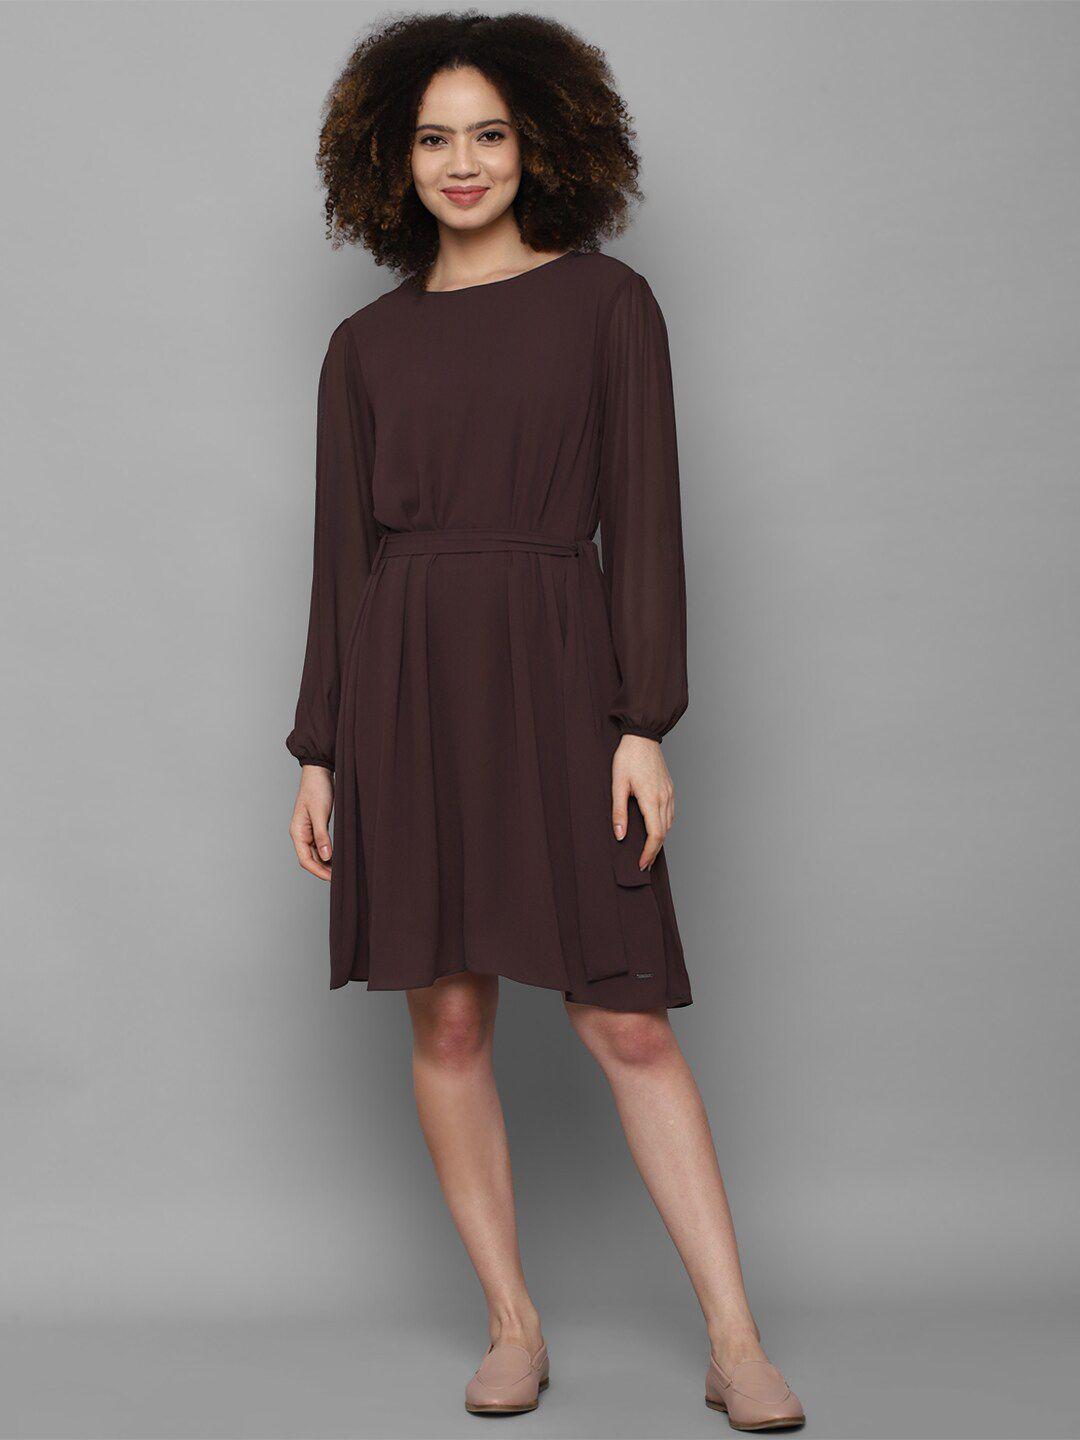 allen solly woman brown solid polyester round neck dress